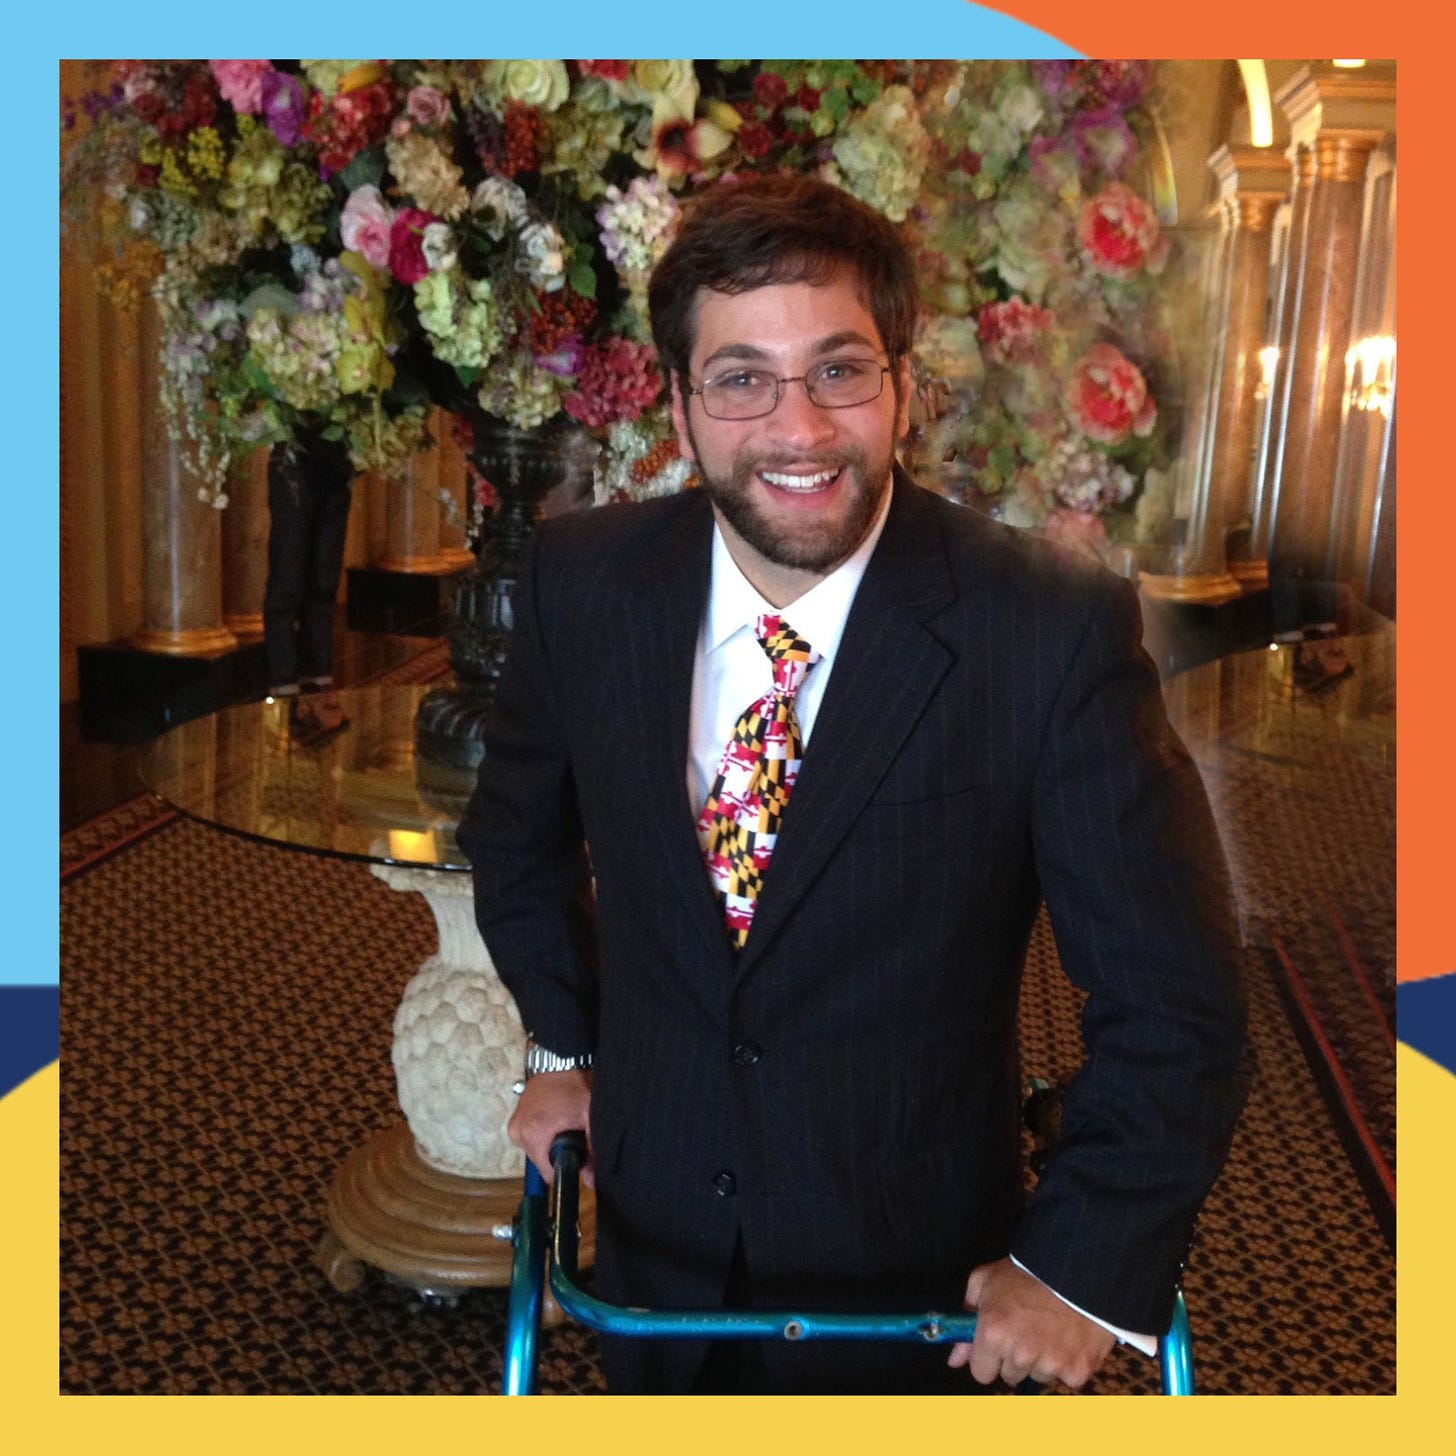 Aaron wears a suit and tie, He has brown hair and a mustaches and goatee. He uses a walker and smiles at the camera.